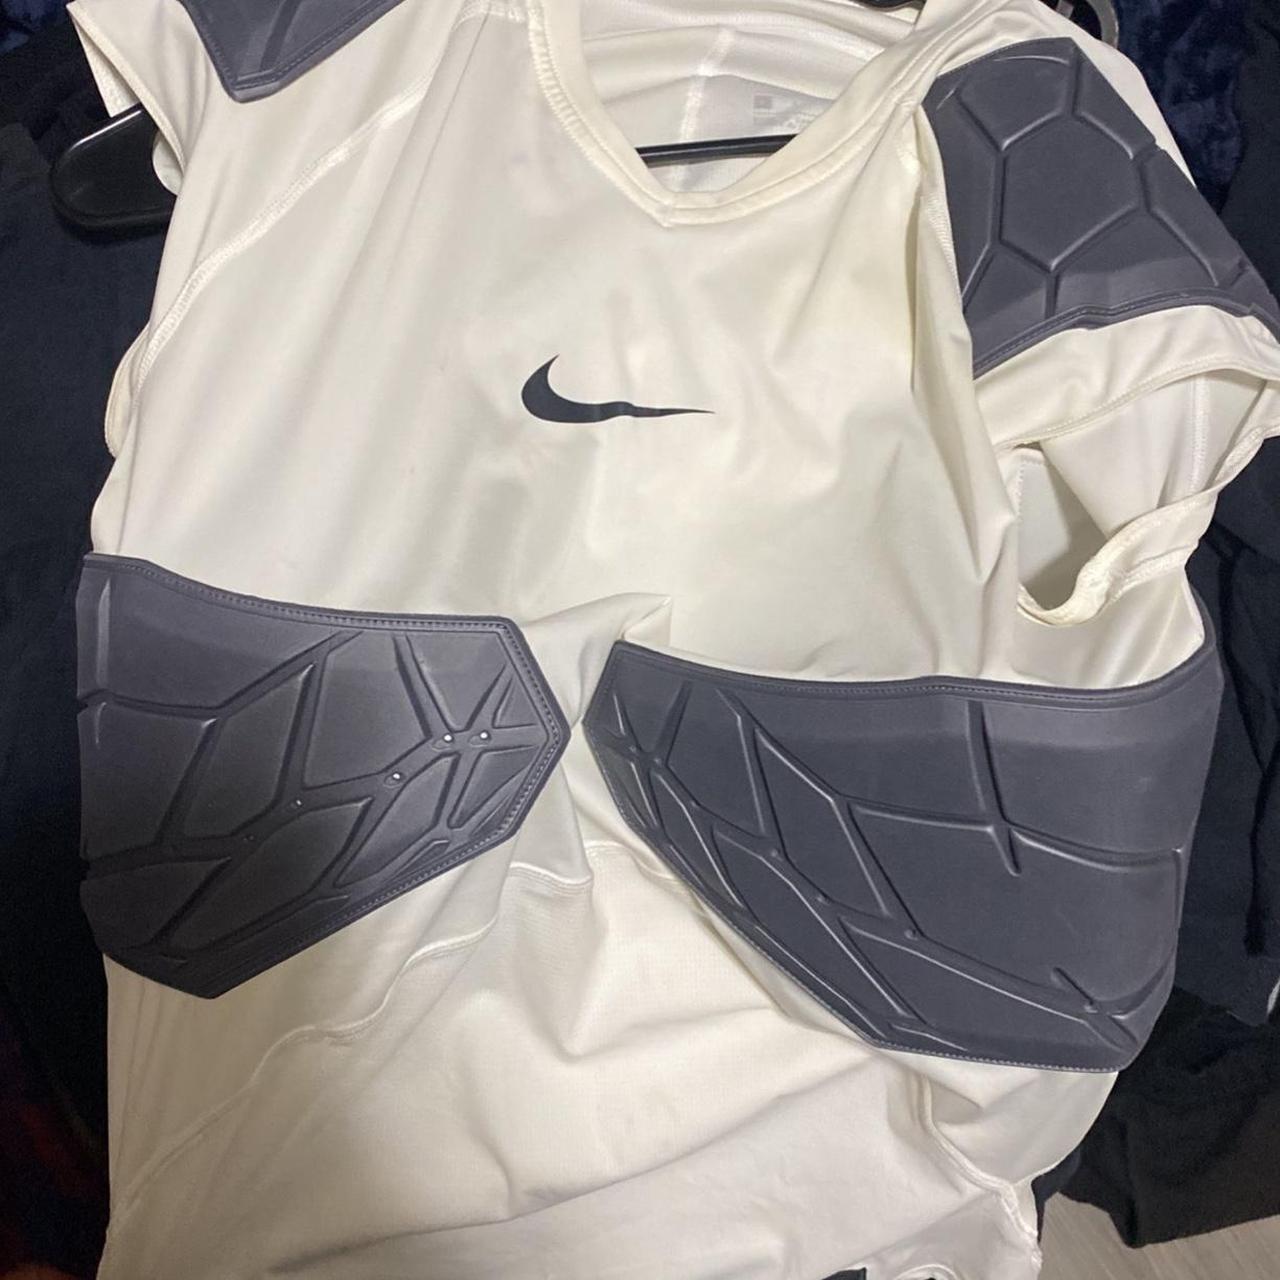 Large Nike pro hyper strong white football compression padded